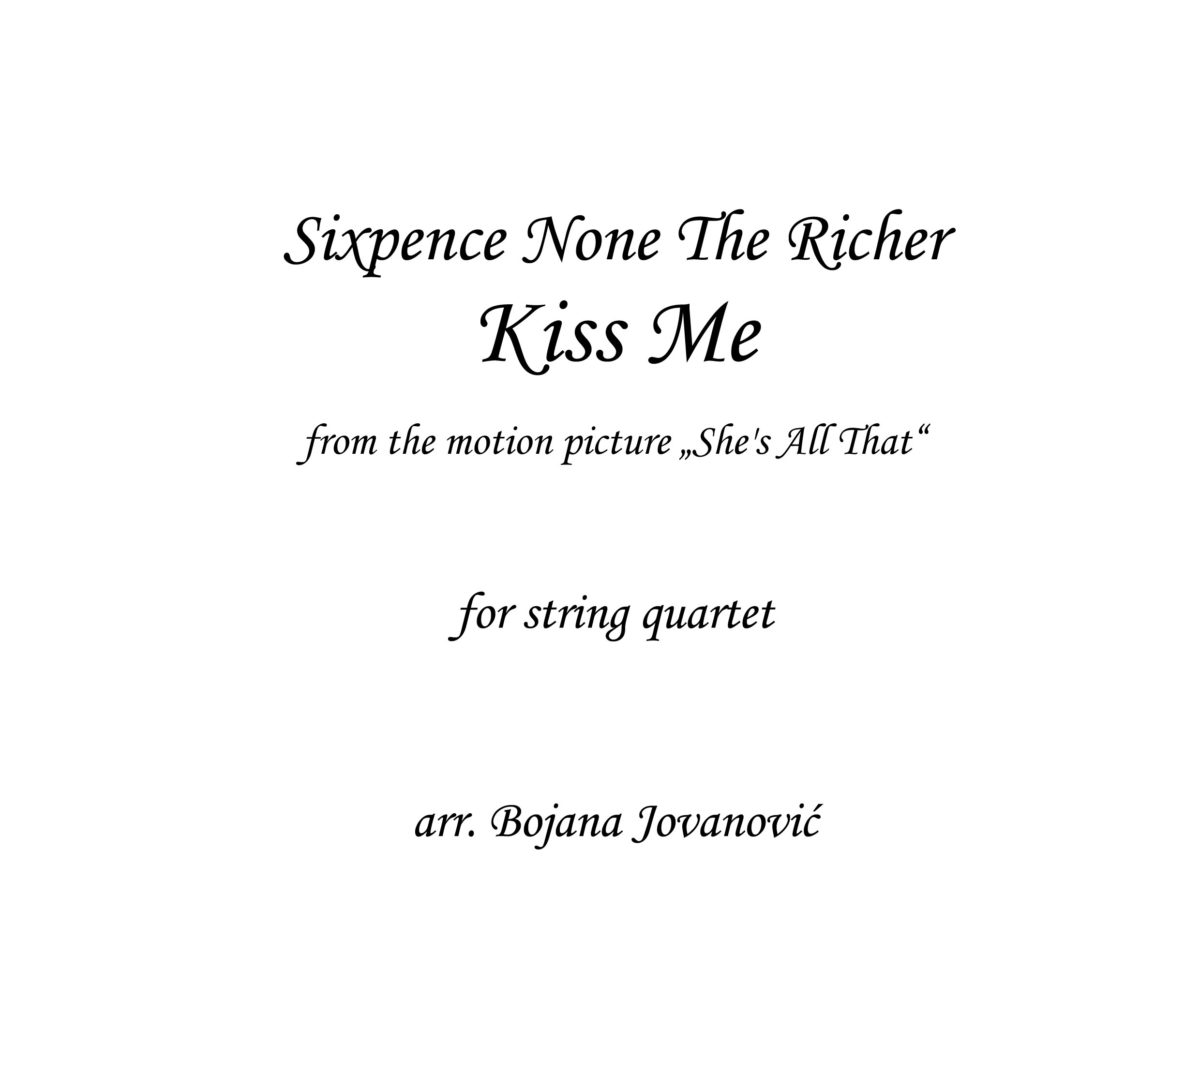 Kiss me Sixpence None The Richer Sheet music